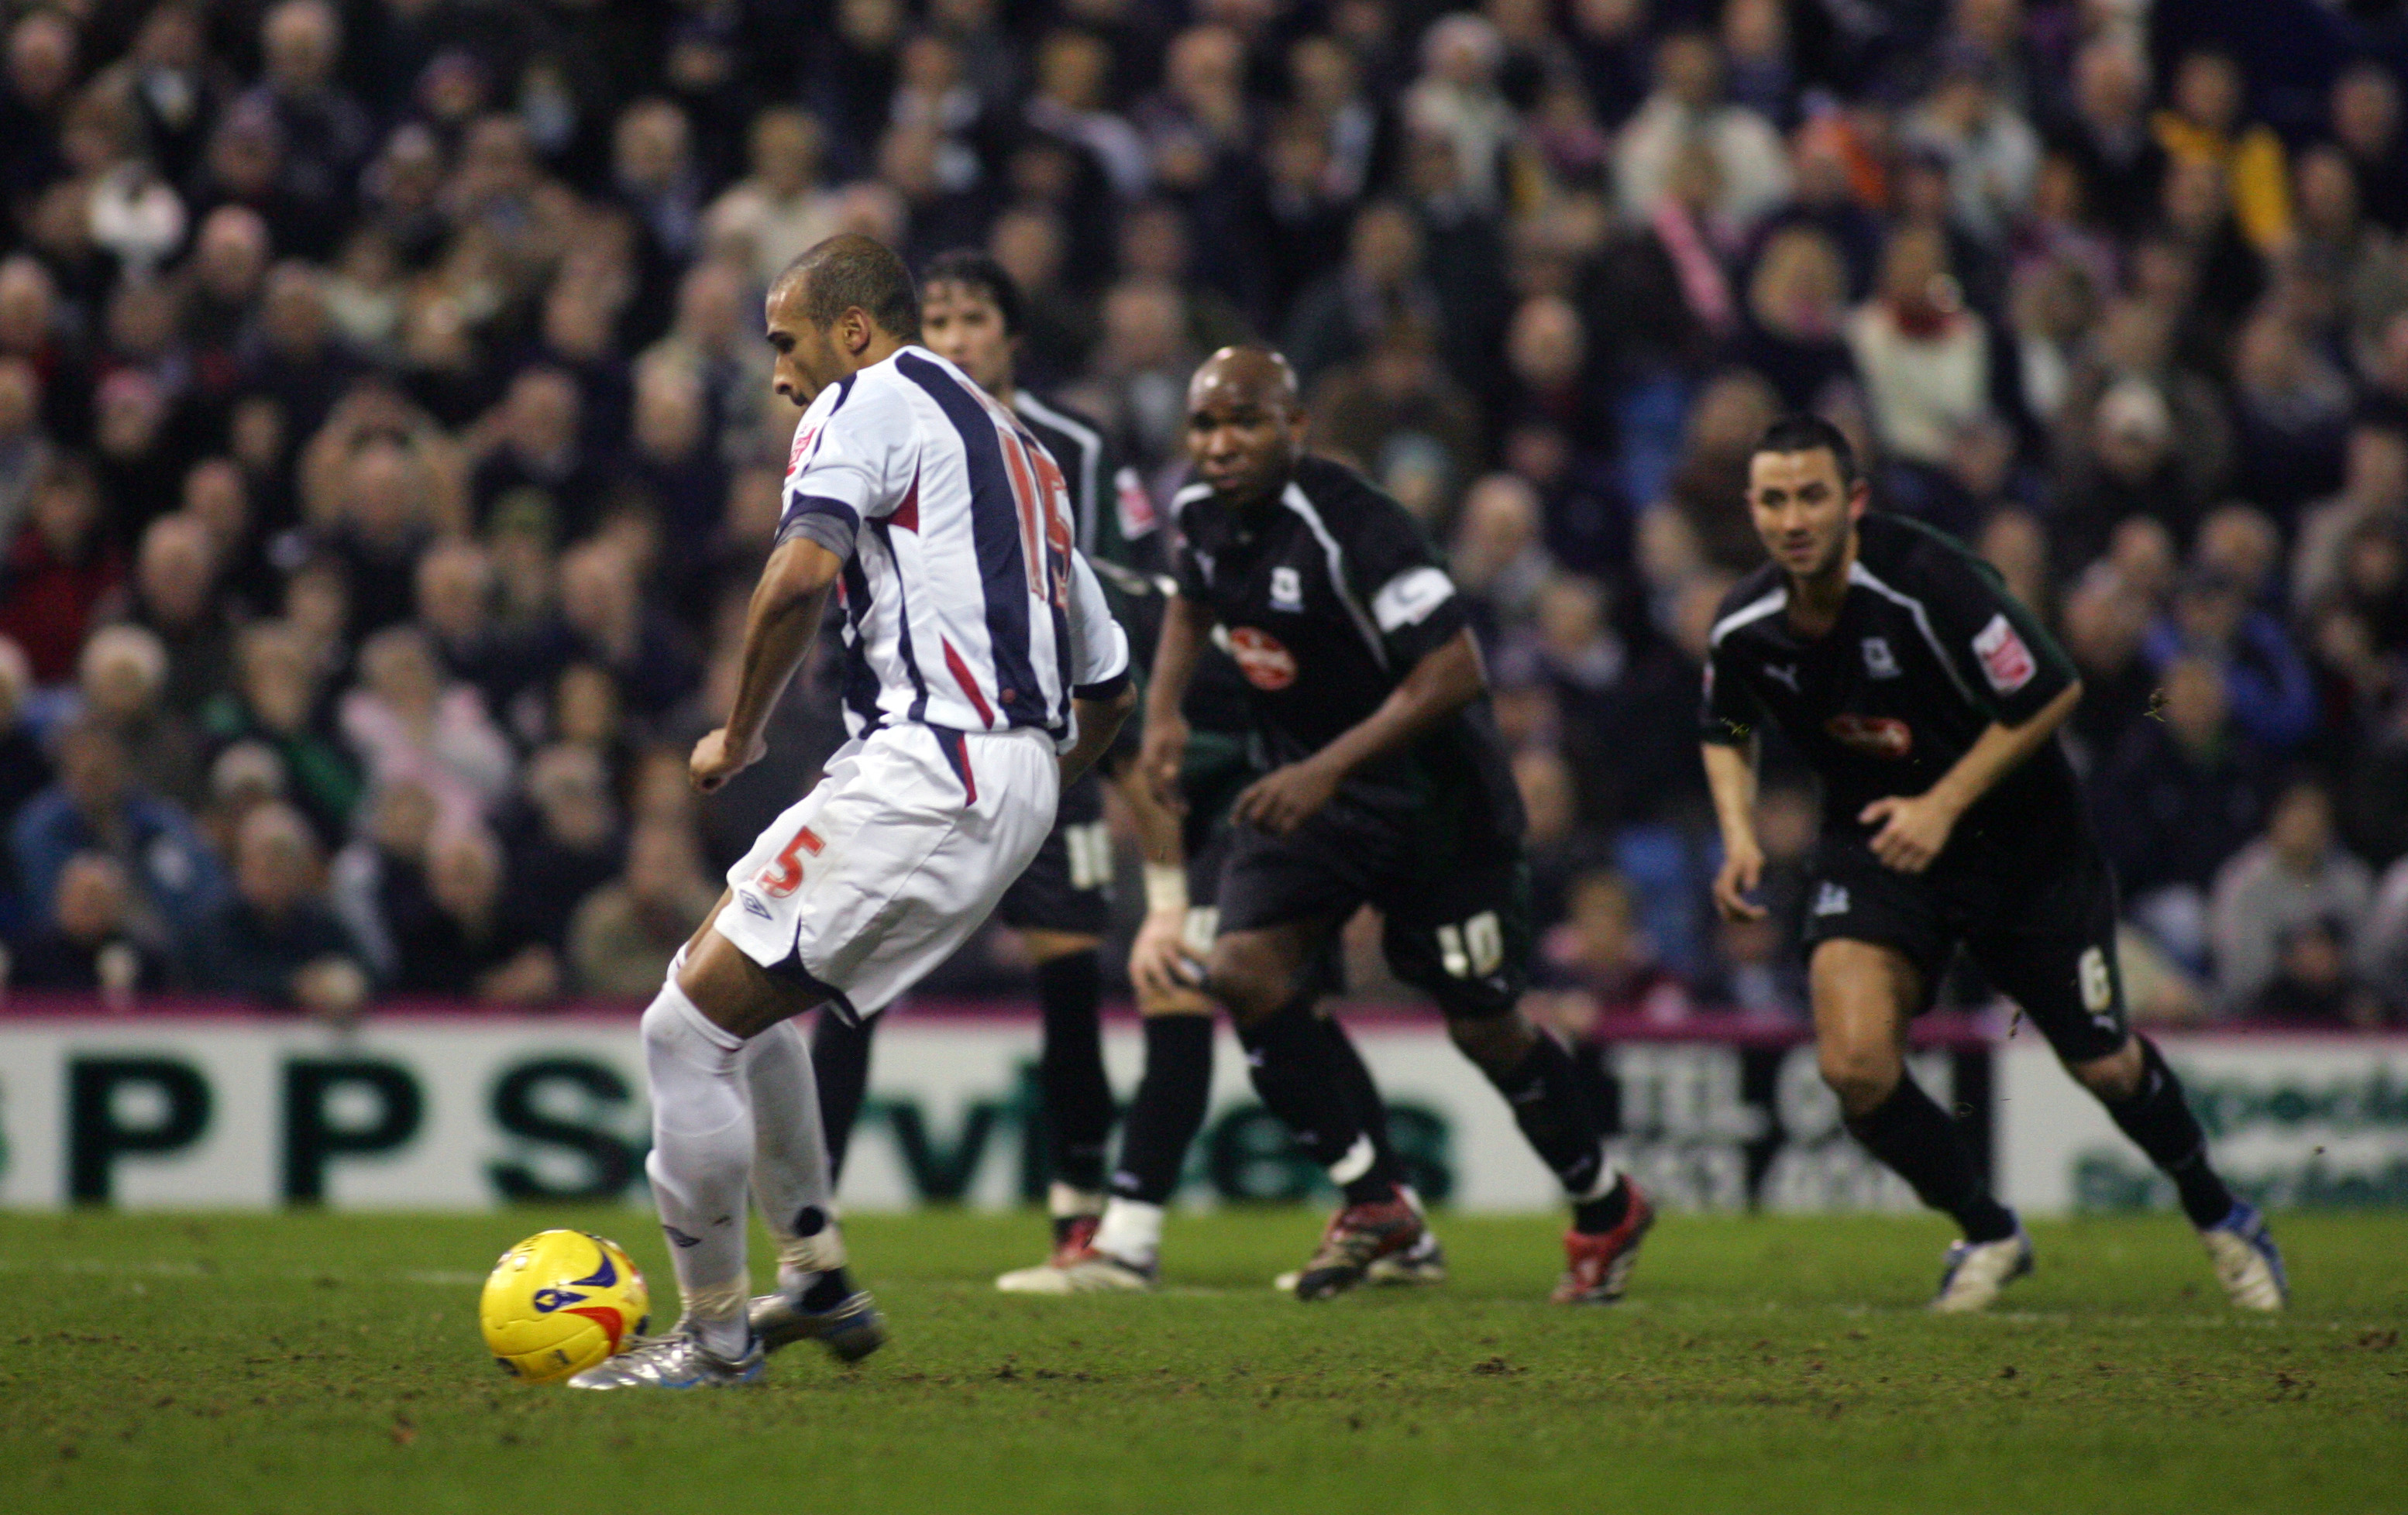 Diomansy Kamara scoring a penalty against Plymouth in 2007